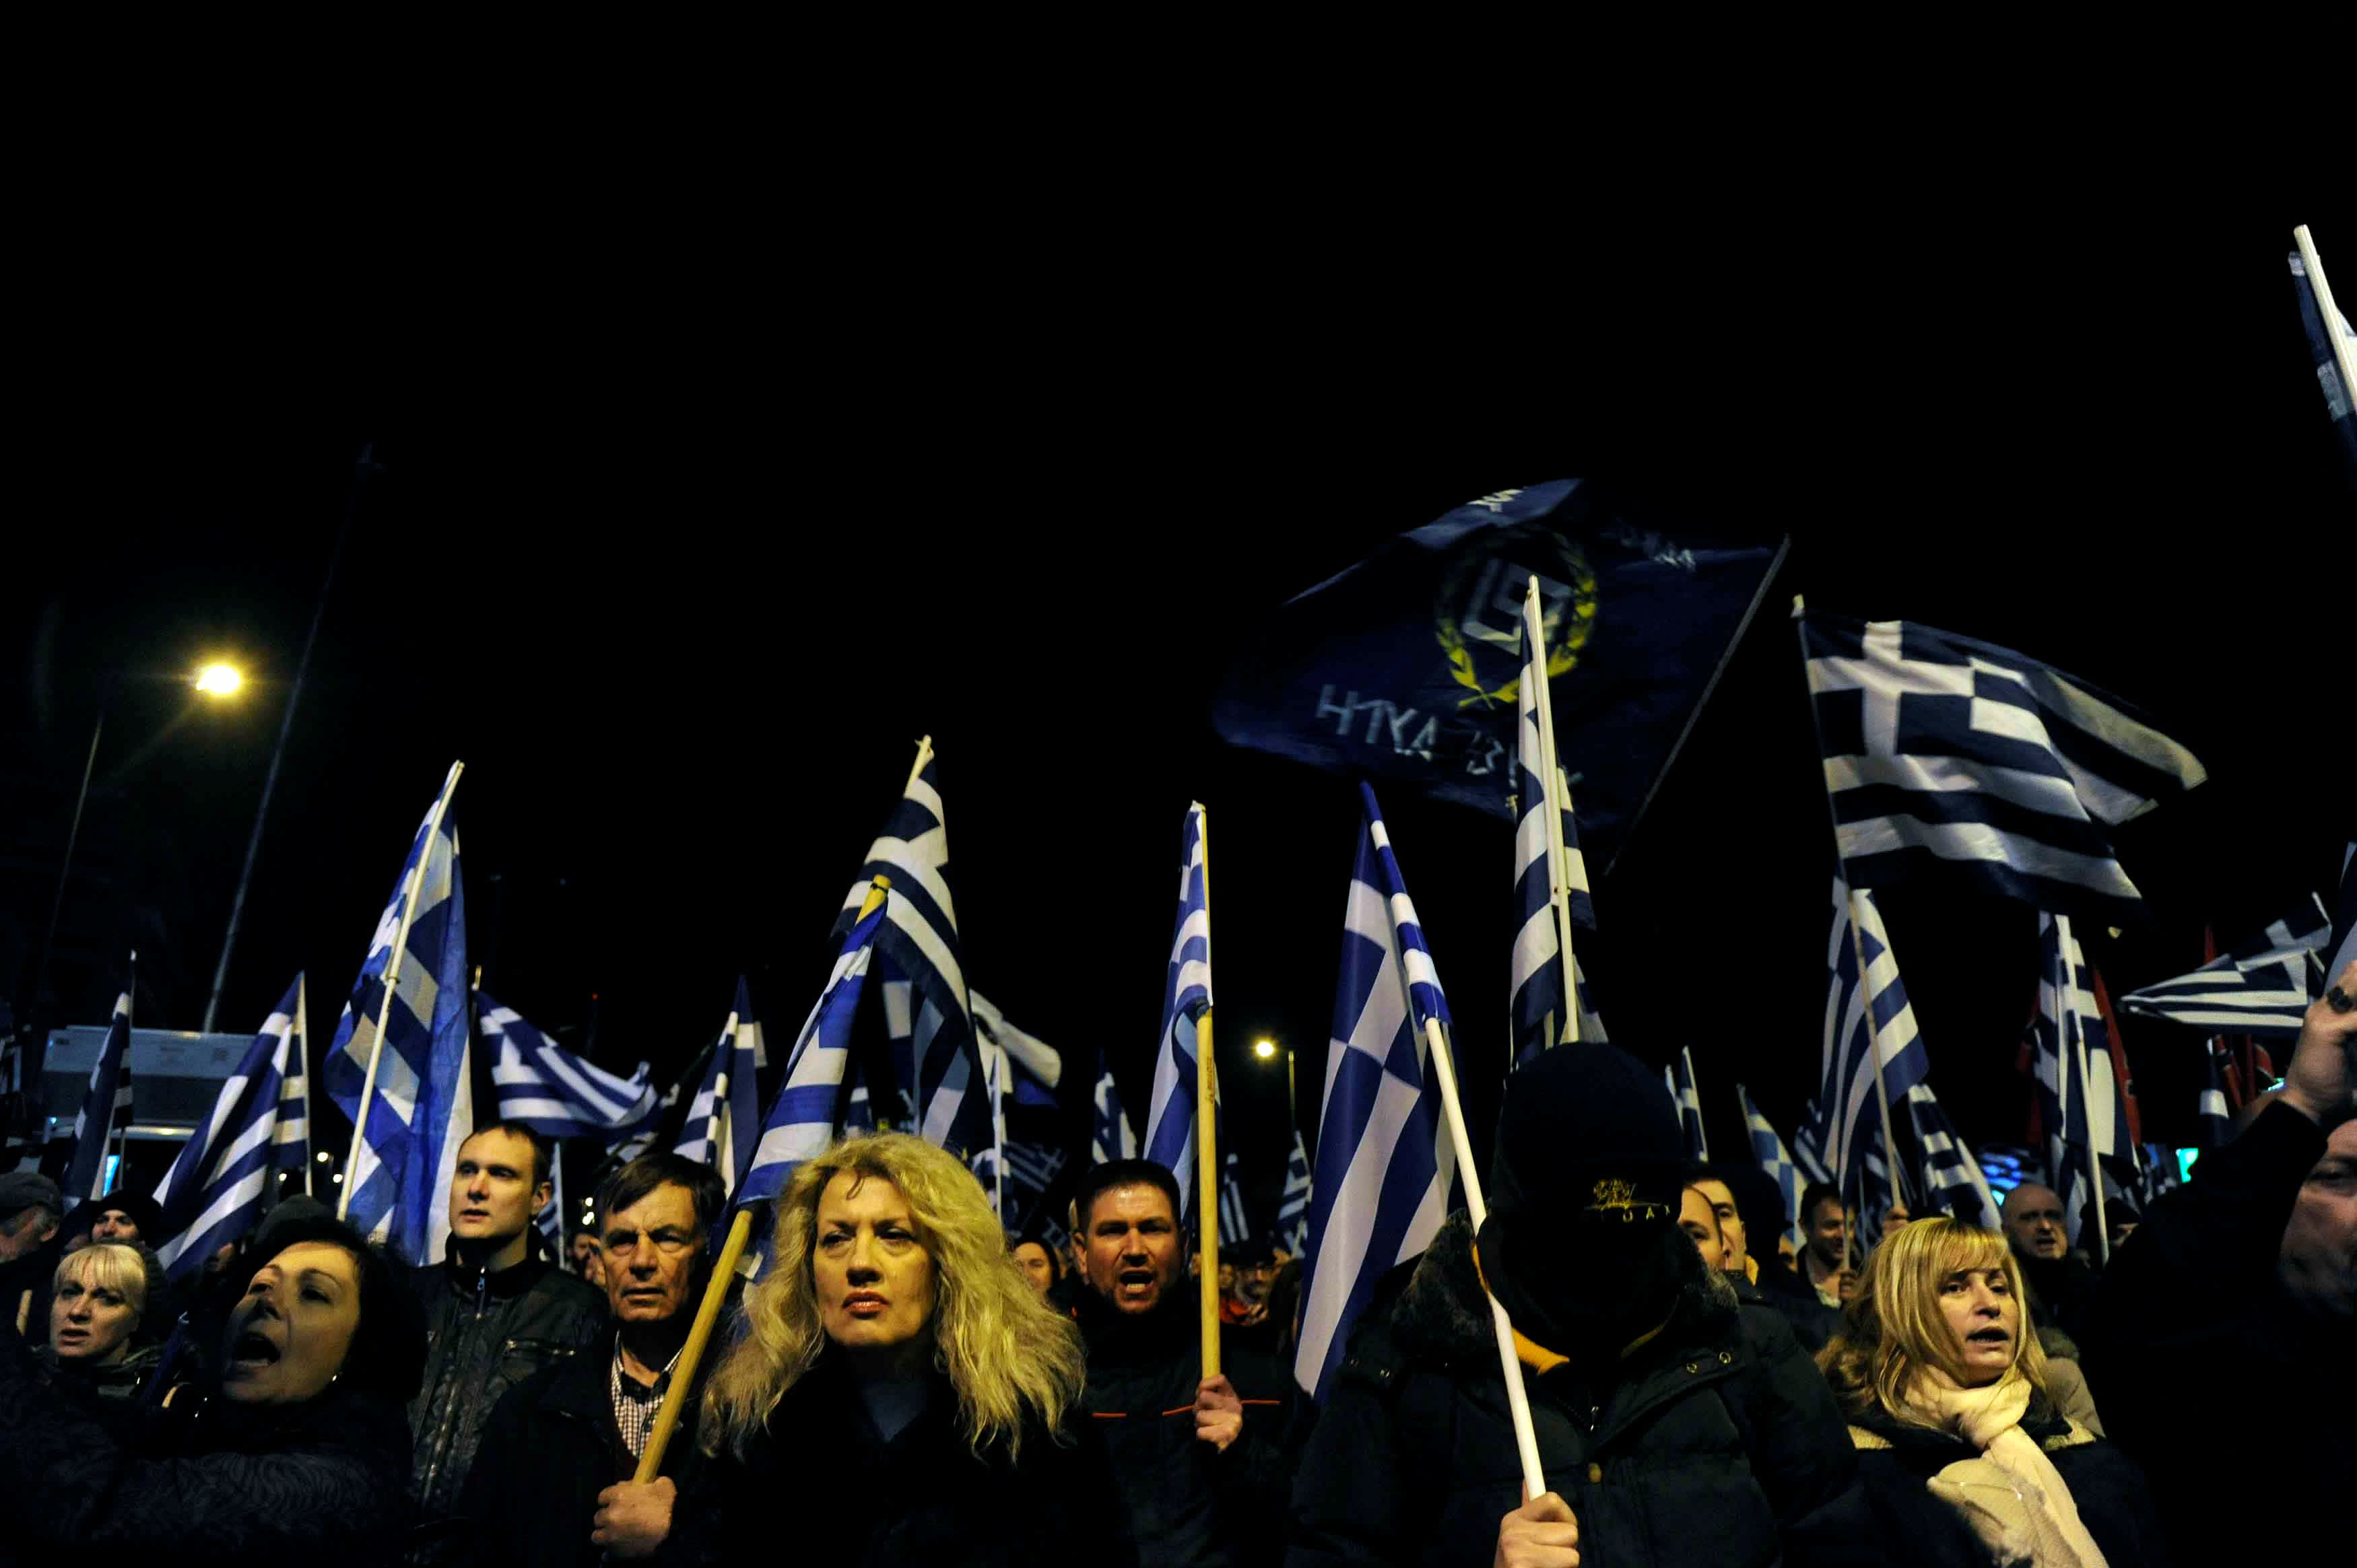 Supporters of Greece's far-right Golden Dawn party shout slogans as they wave national and party flags during an annual rally to commemorate the 21st anniversary of the Imia dispute, in Athens, Greece January 28, 2017. MICHALIS KARAGIANNIS/ REUTERS 